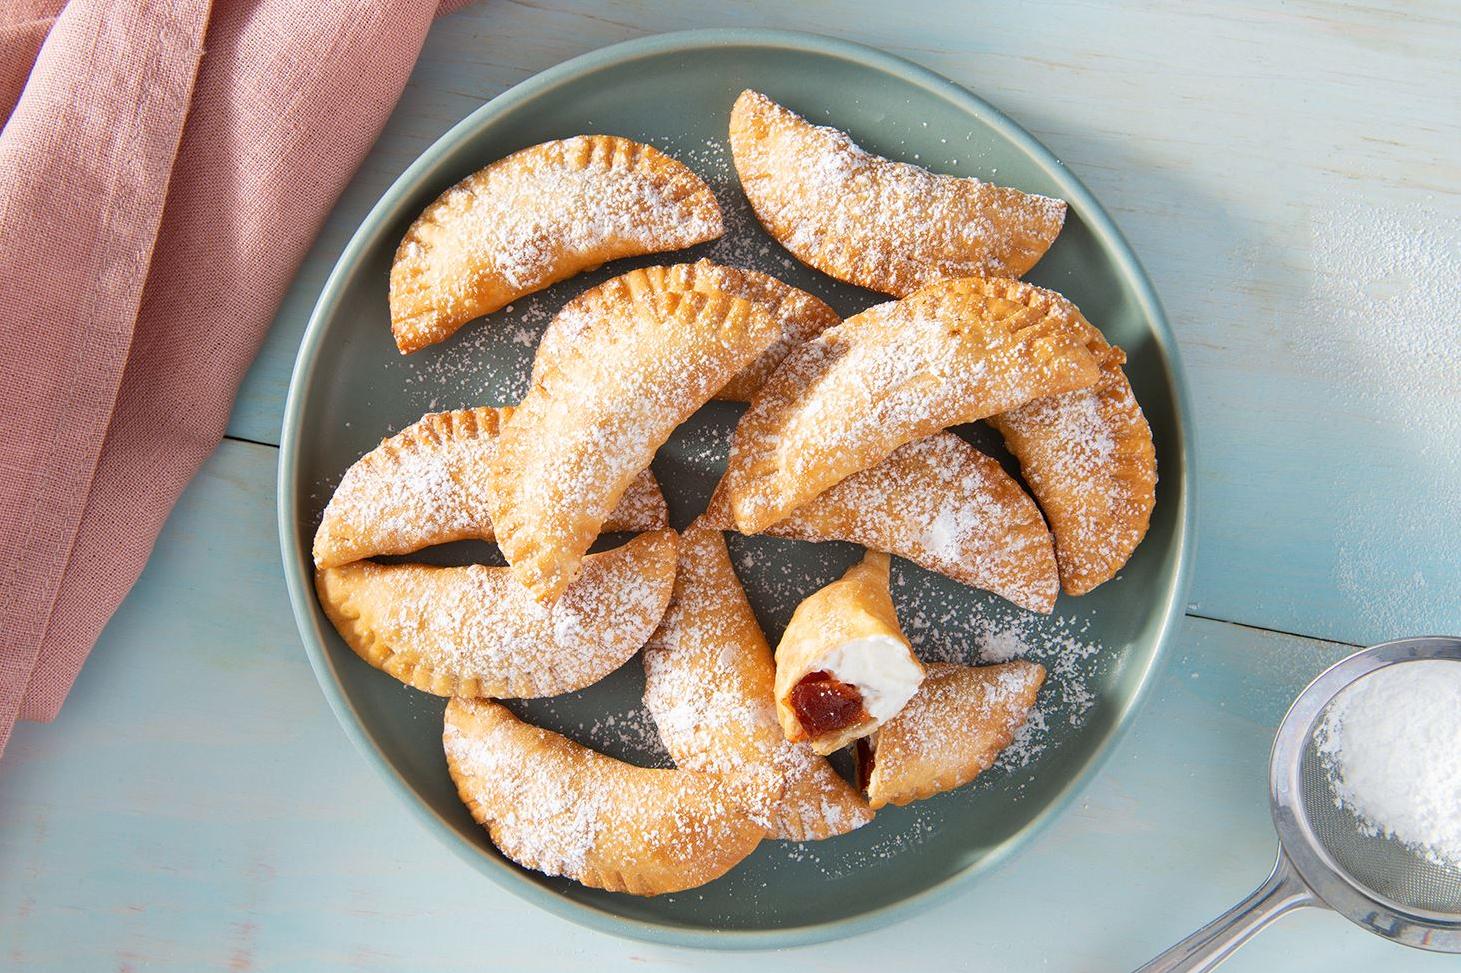  These empanadas are a fun twist on classic pastries that everyone will love!